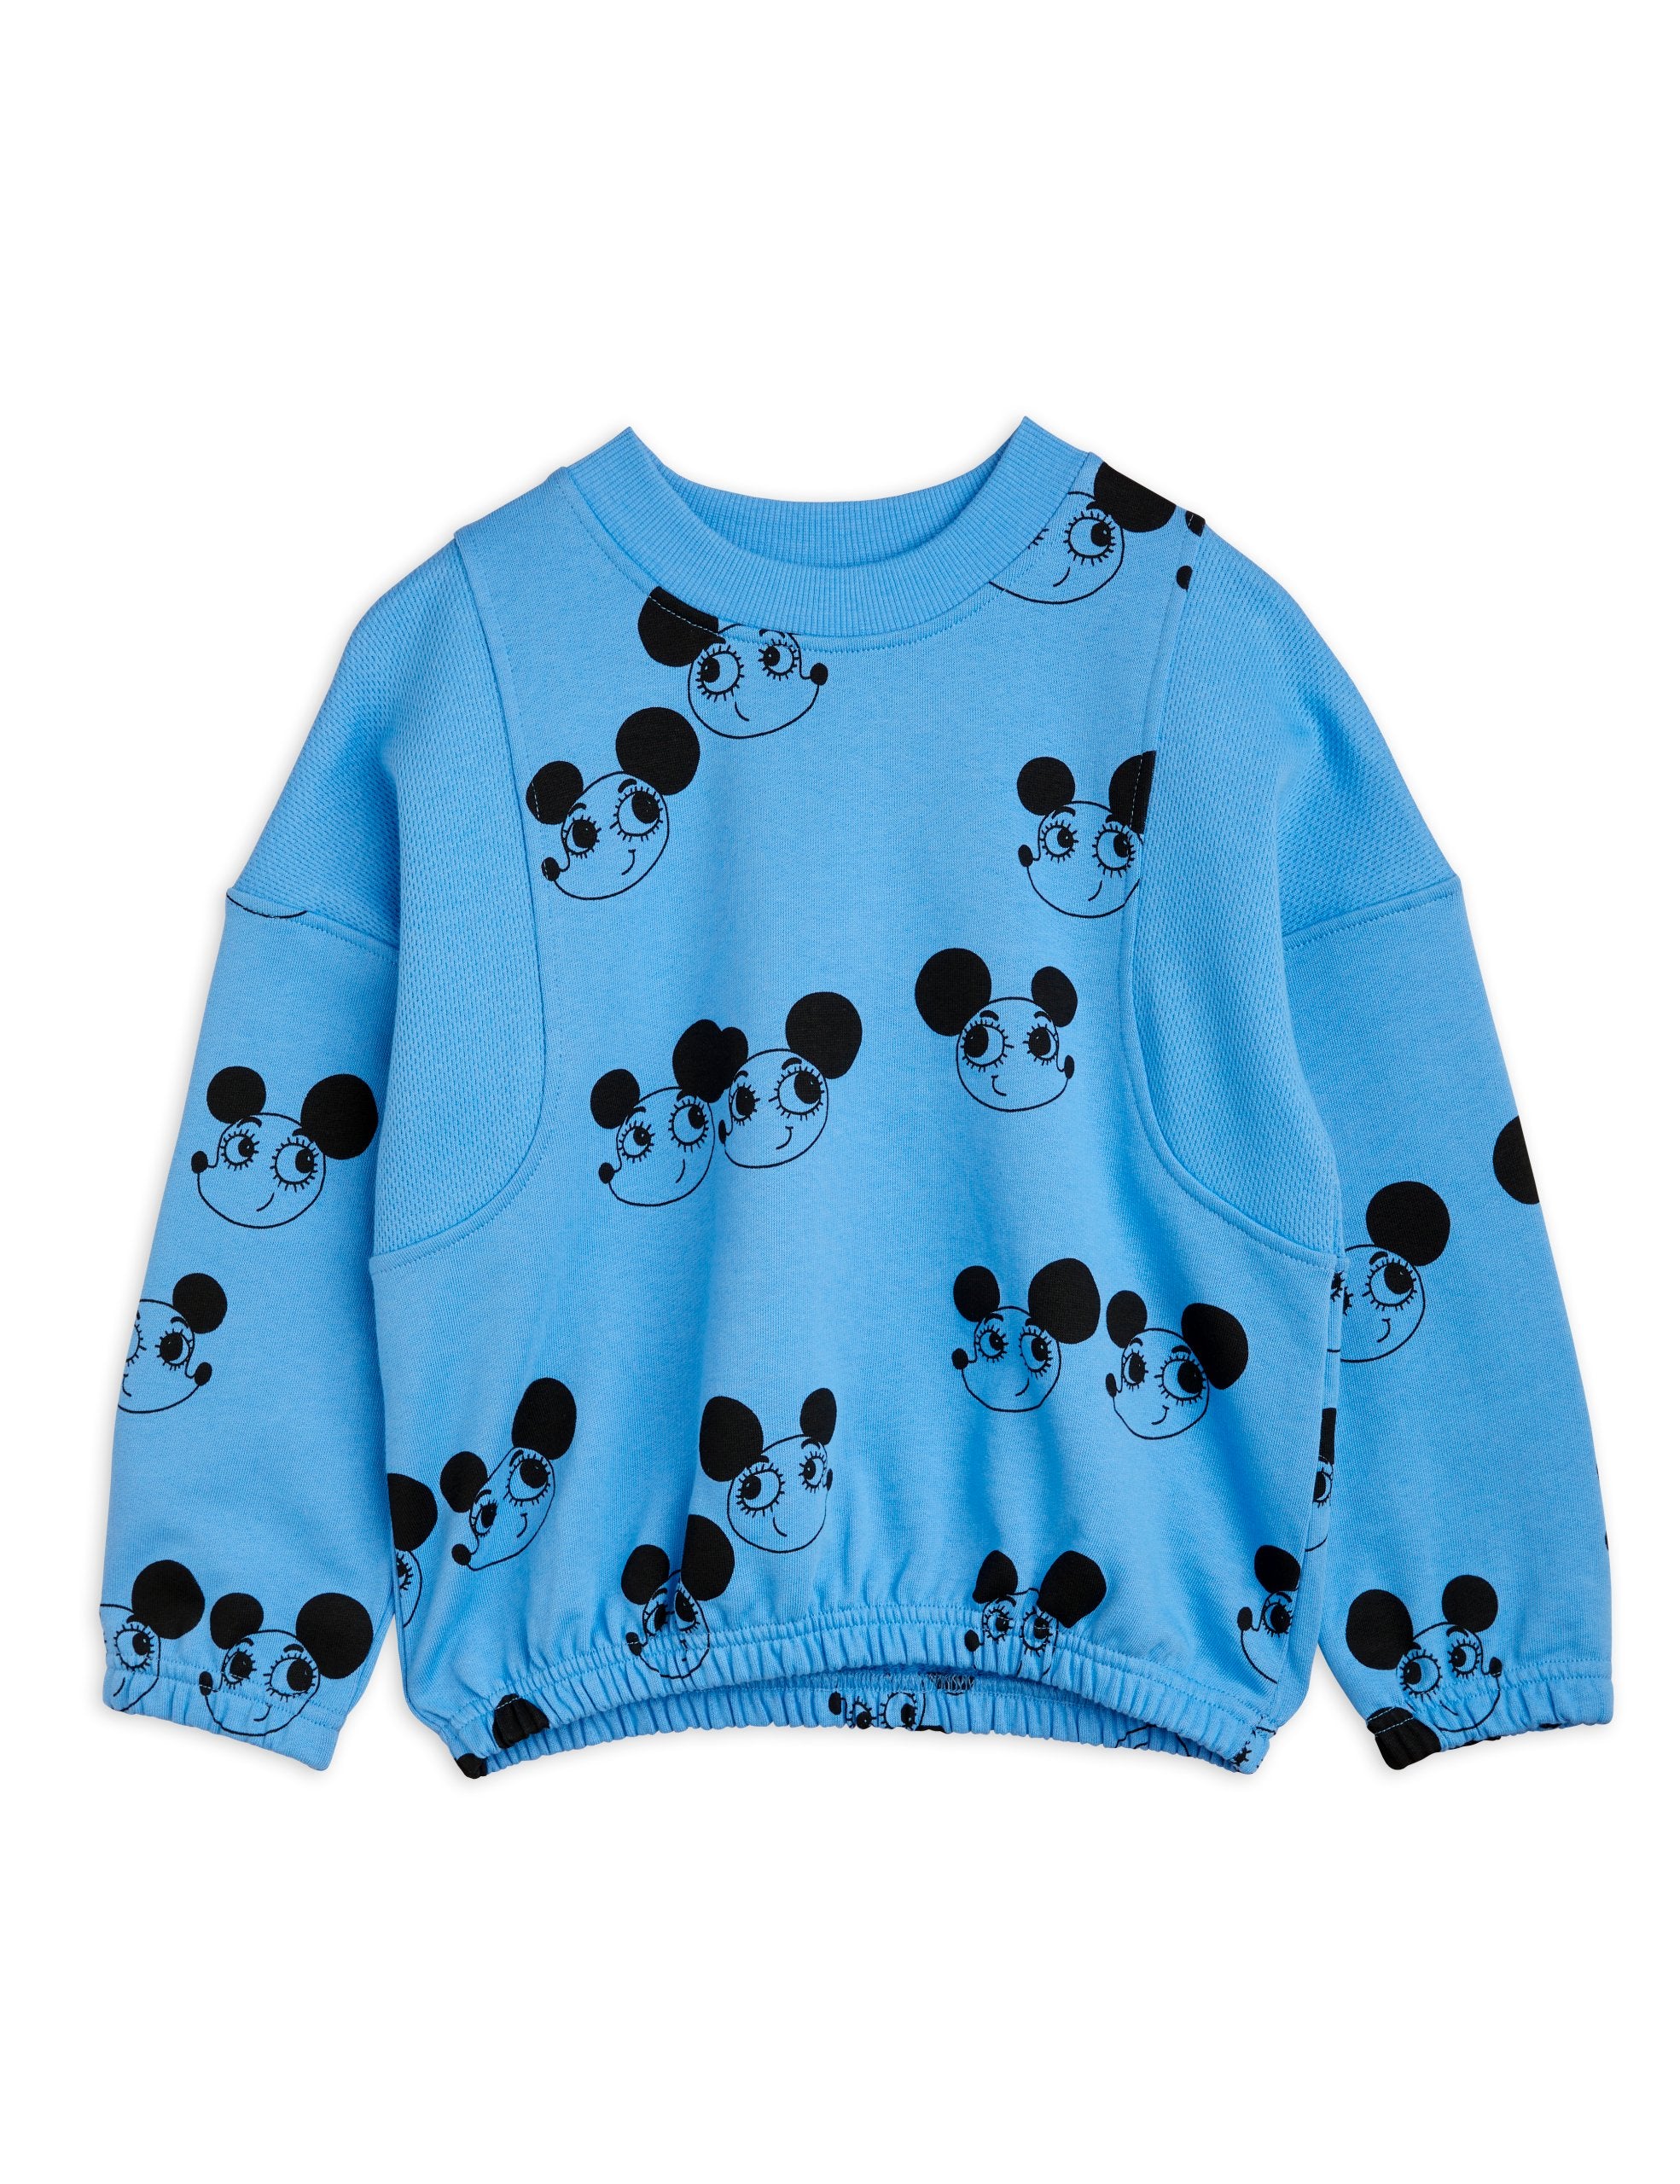 MINI RODINI - Relaxed fit sweatshirt with panel detailing in blue with black mouse print